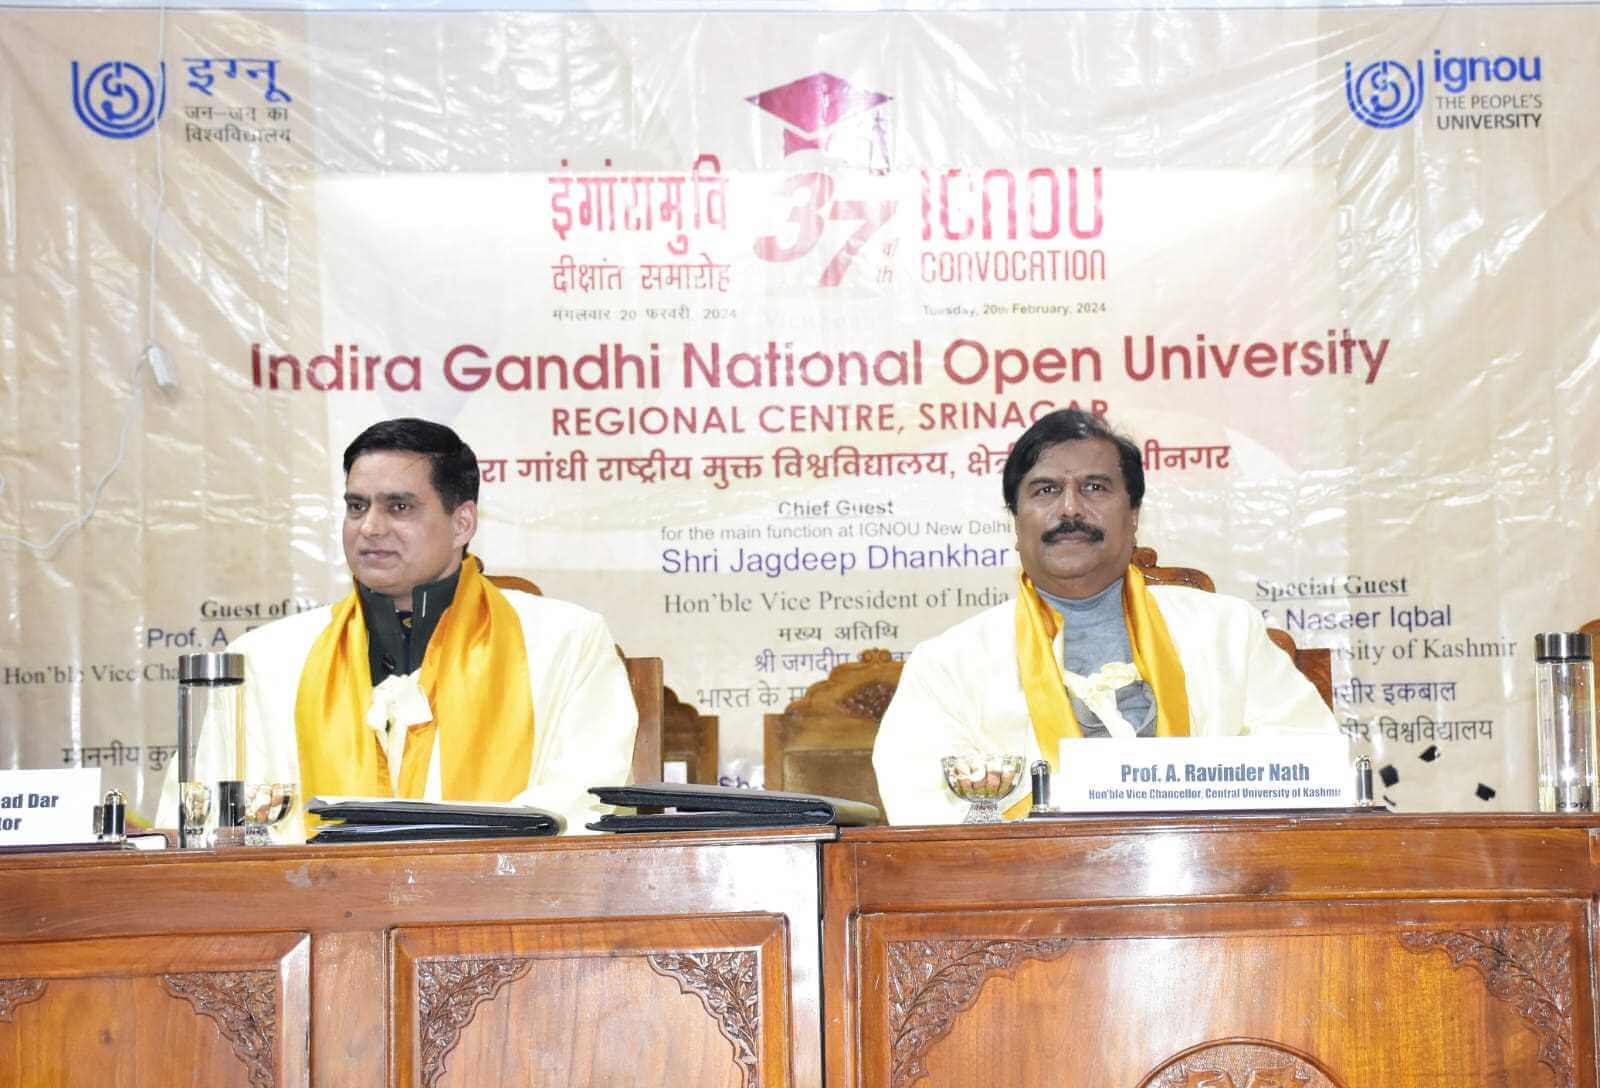 IGNOU holds 37th convocation, Jagdeep Dhankhar was present as Chief Guest